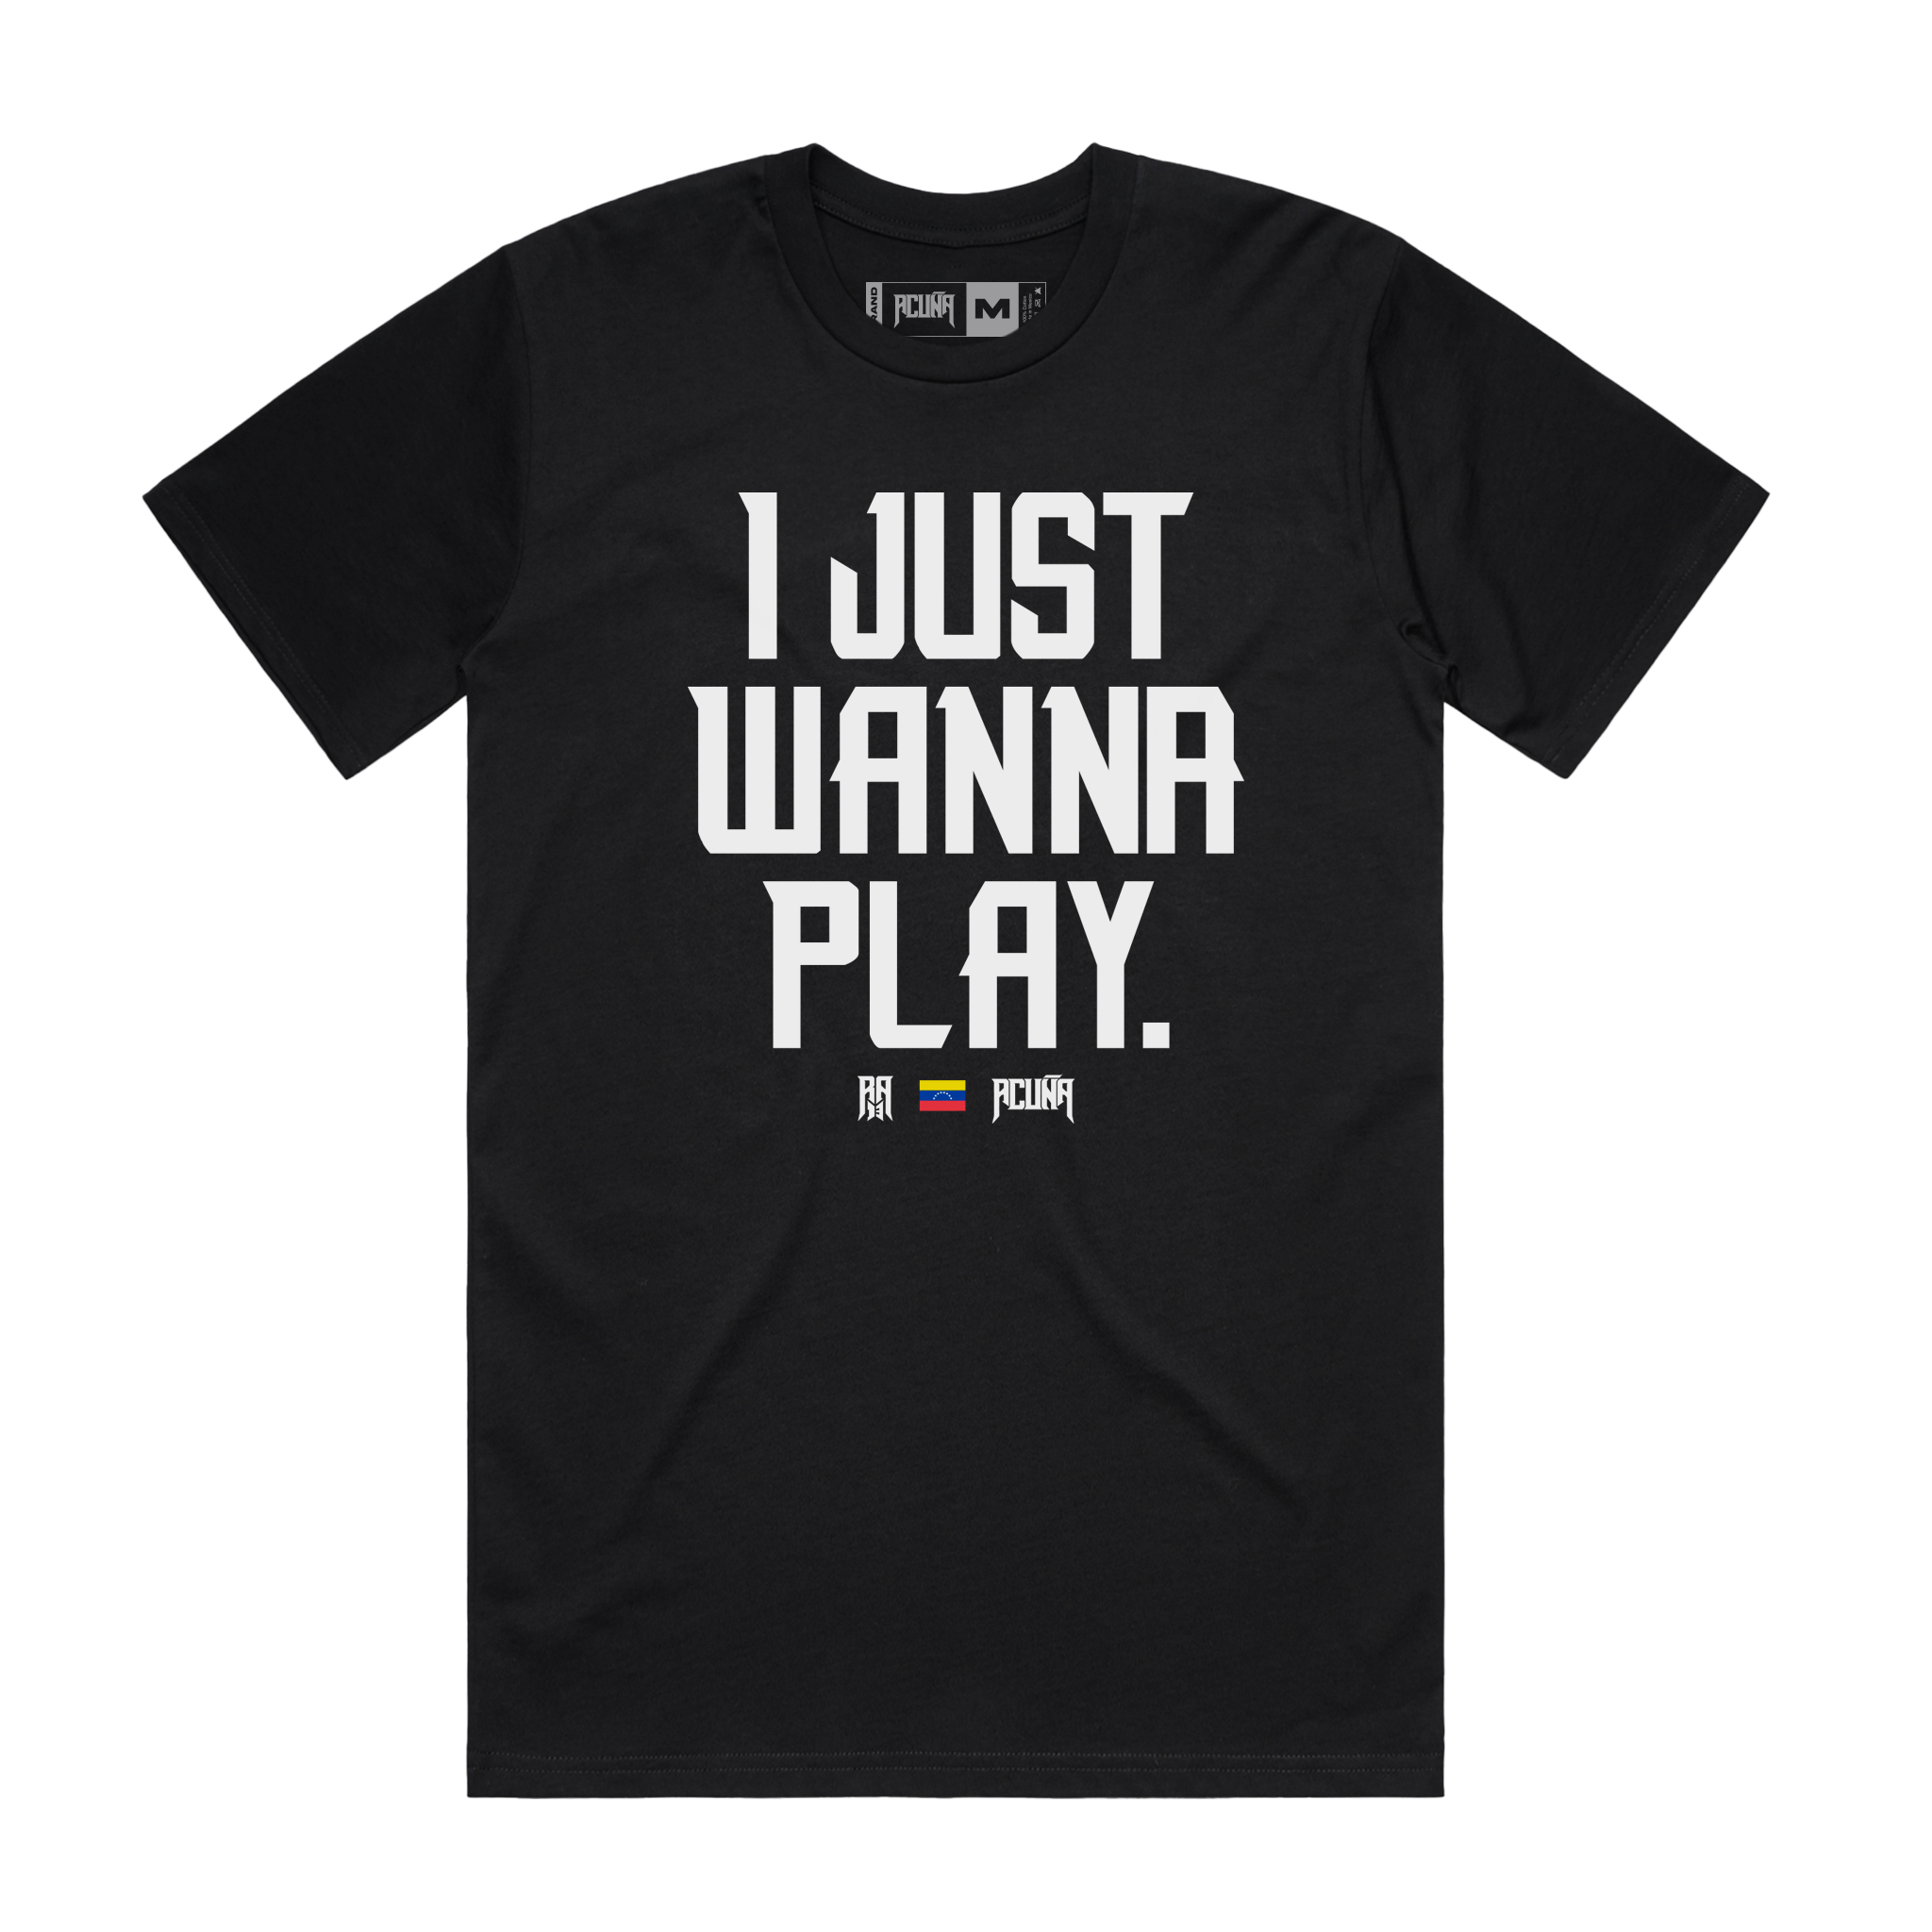 Front Image of the Black Crew Neck Short Sleeves Tee deaturing " I just Wanna play", RA13 and Acuña logos printed in white and the Flag of Venezuela